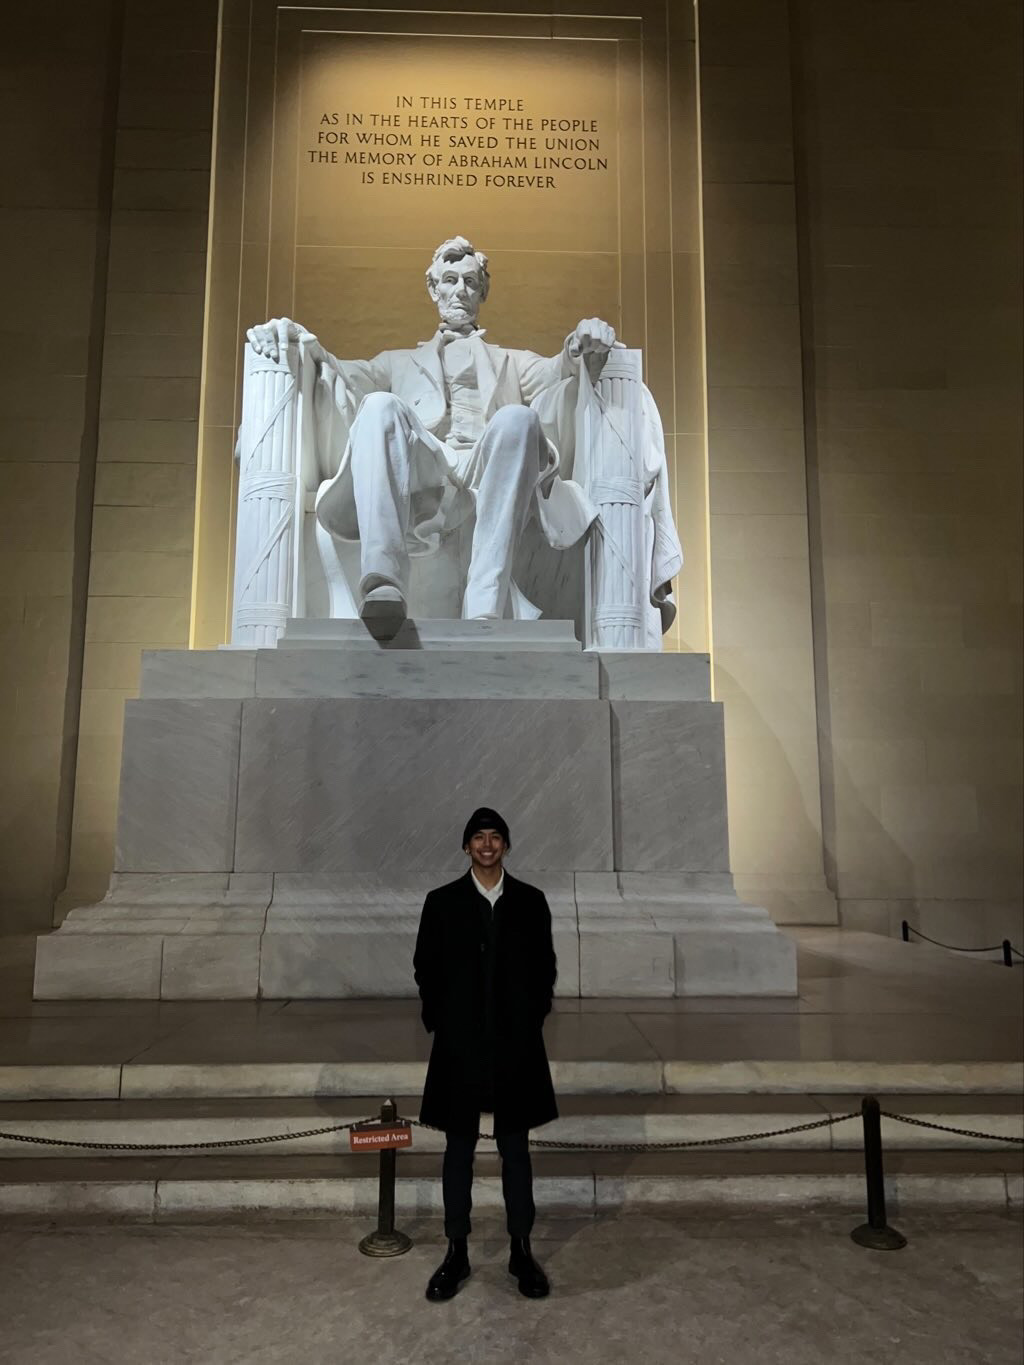 Jordan standing in front of the Lincoln Memorial at night